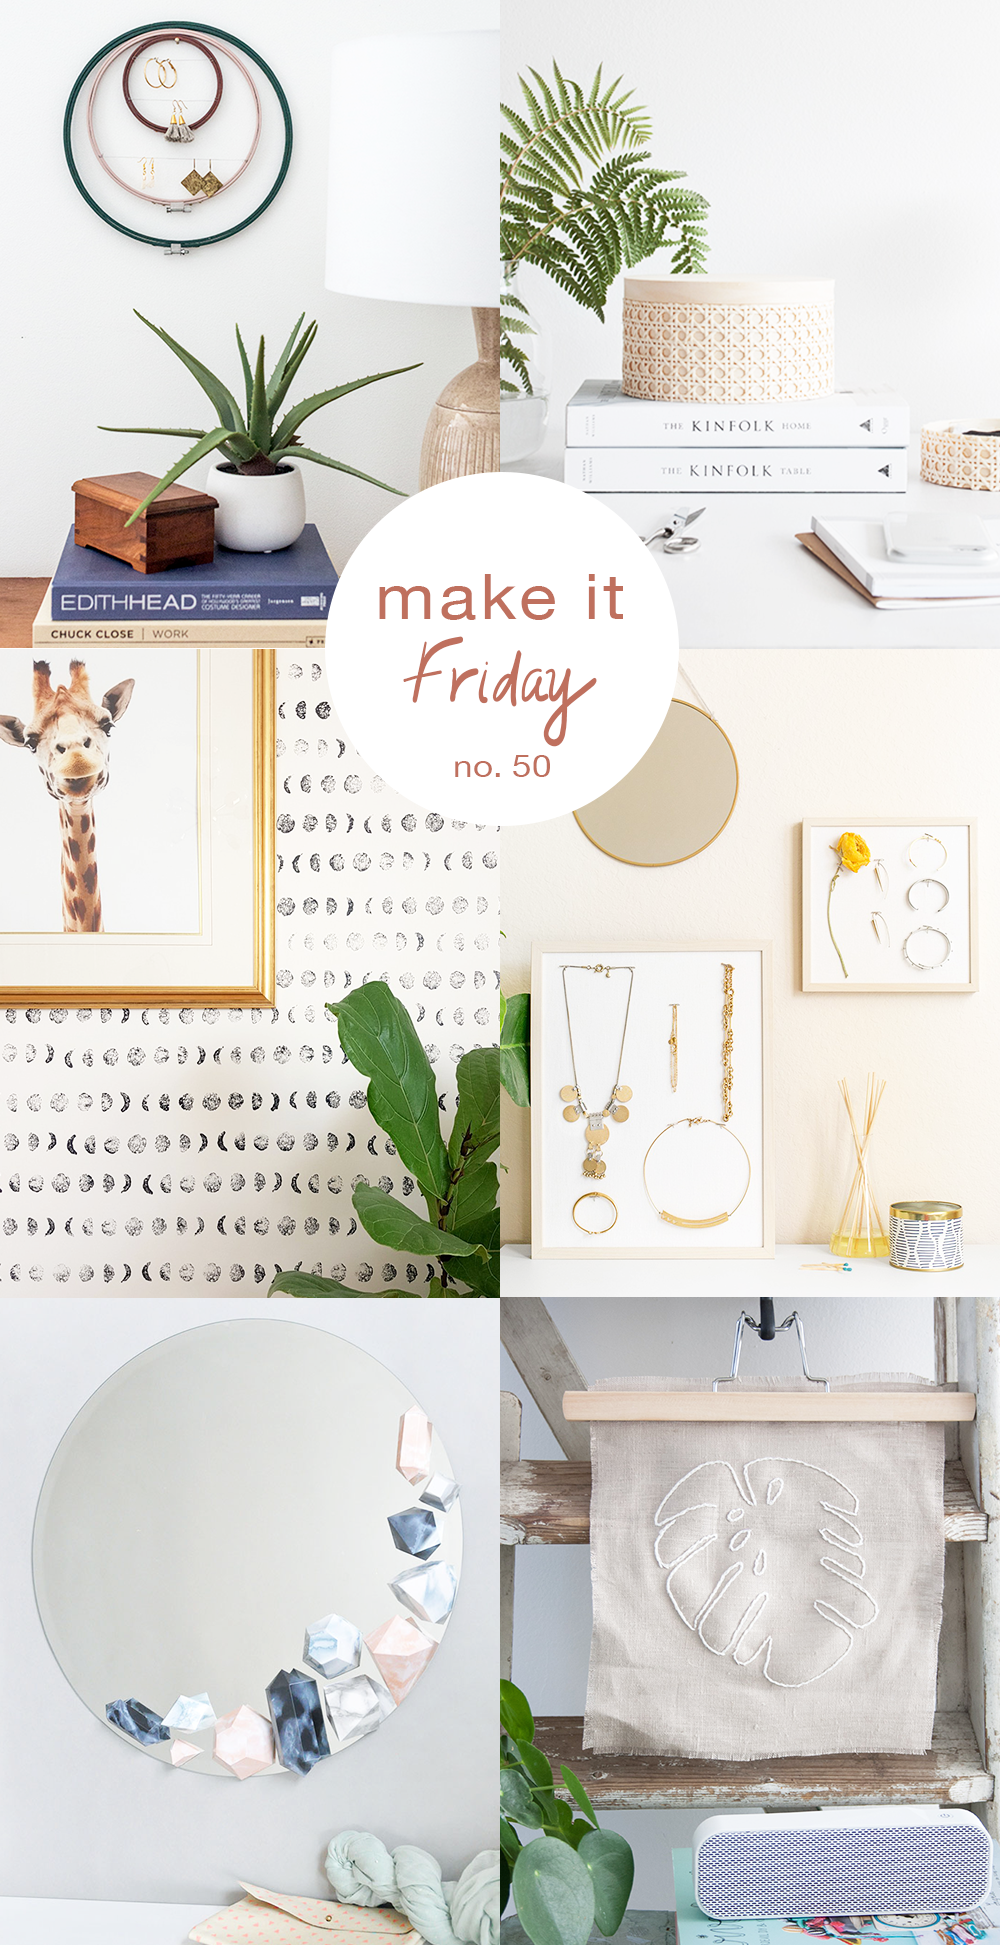 All the best DIY project ideas for you to make this weekend!